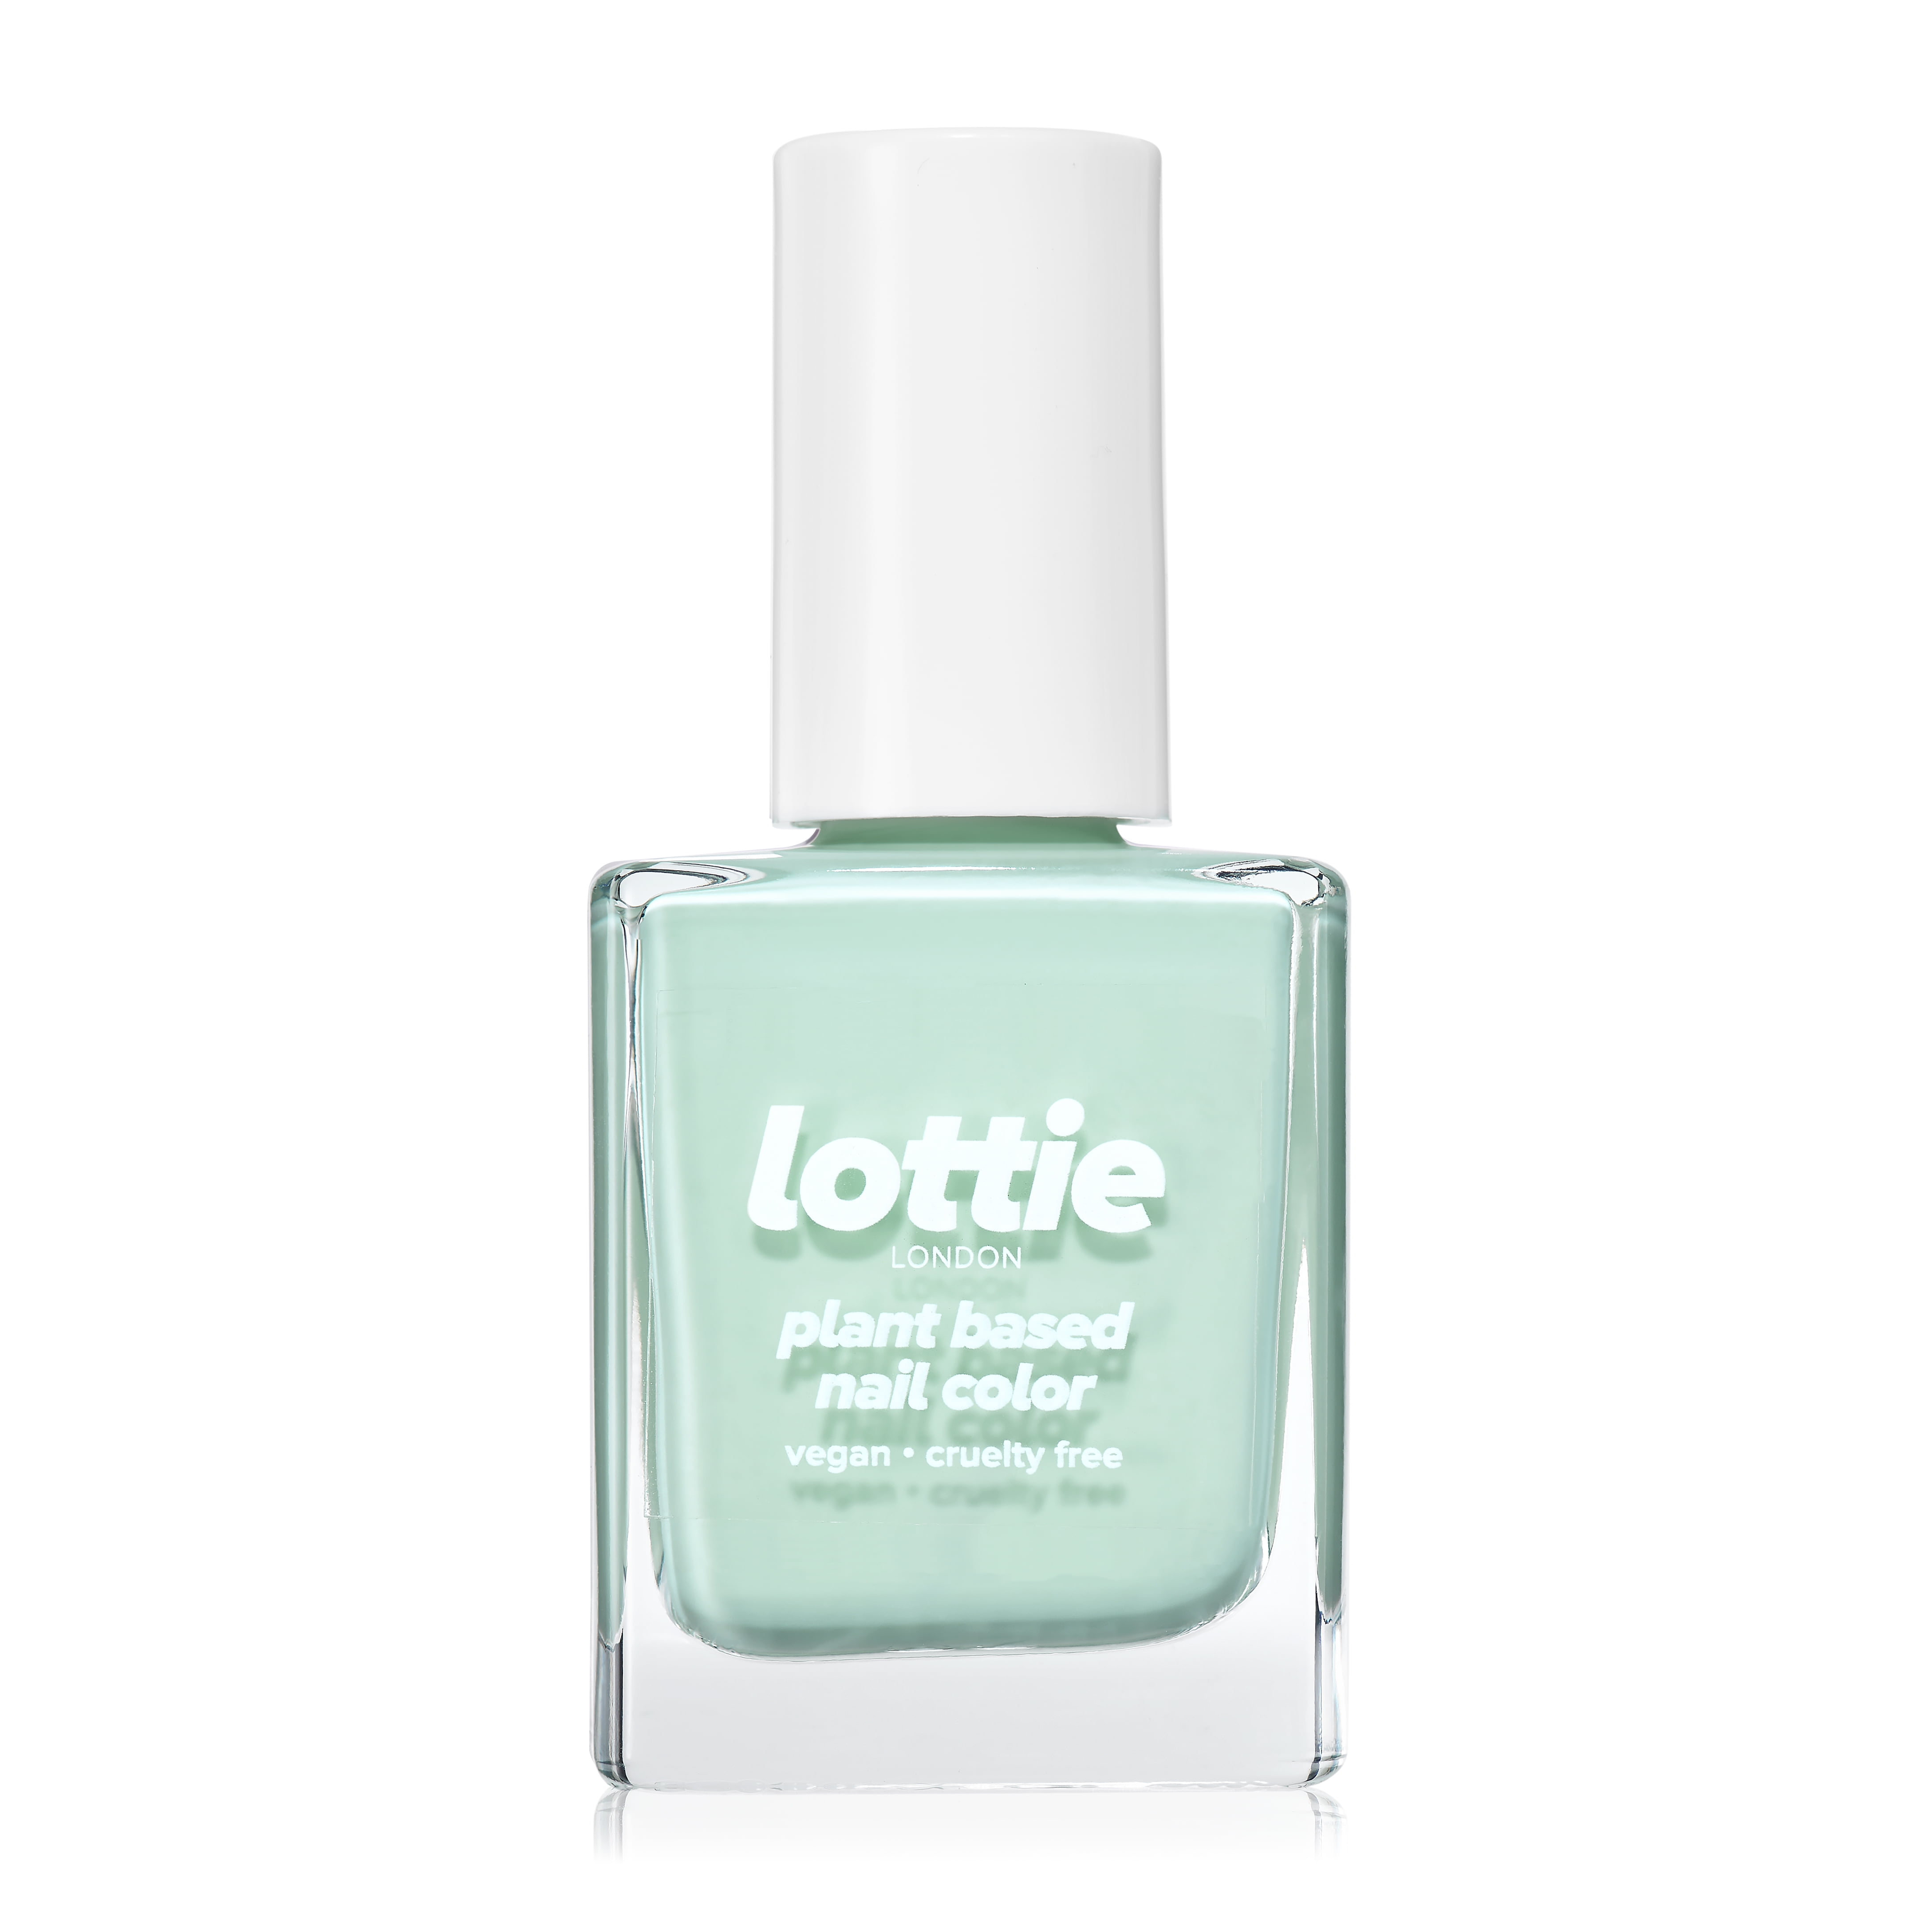 Lottie London Plant Based Gel Nail Color, All Free, pastel mint green, Iconic, 0.33 oz